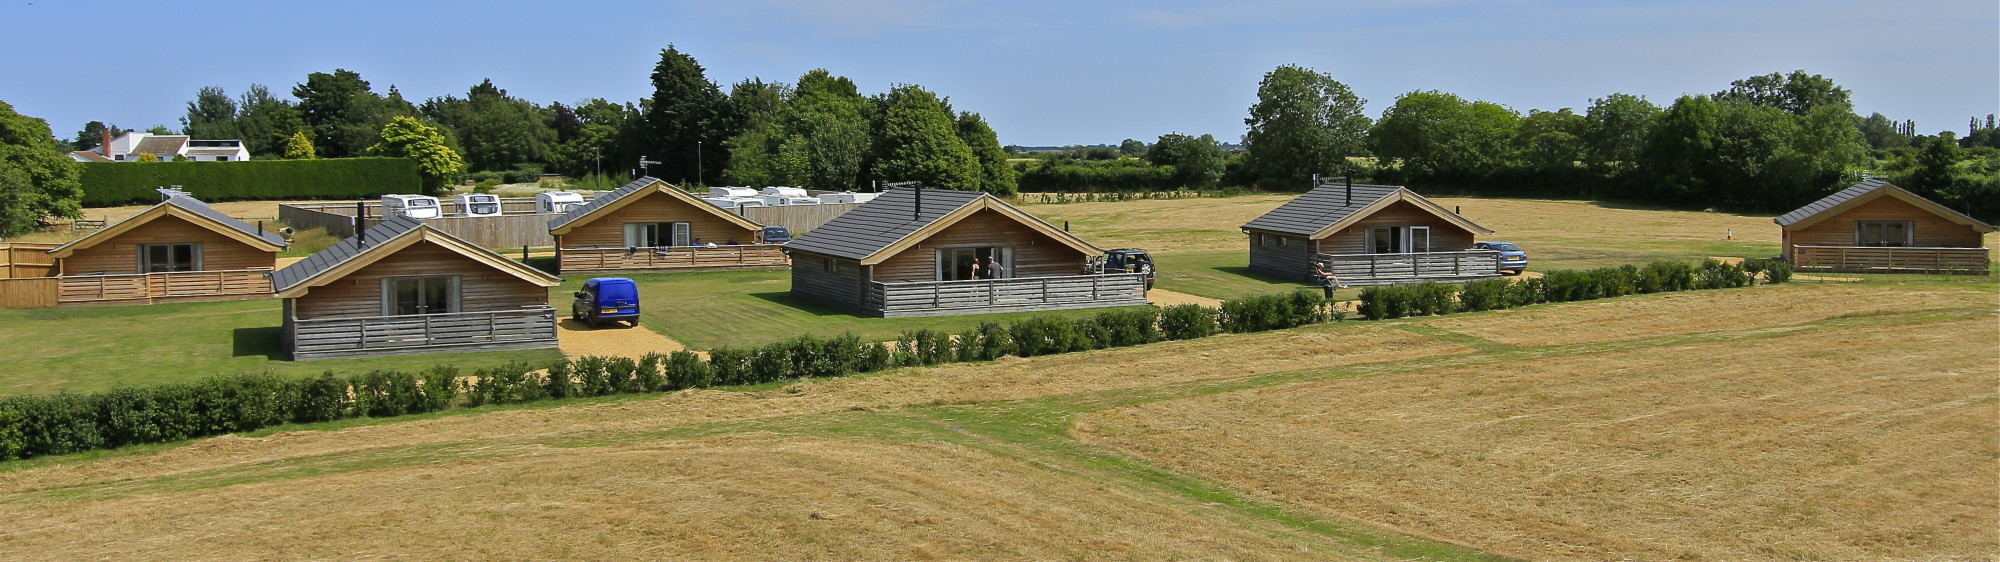 lodges overview